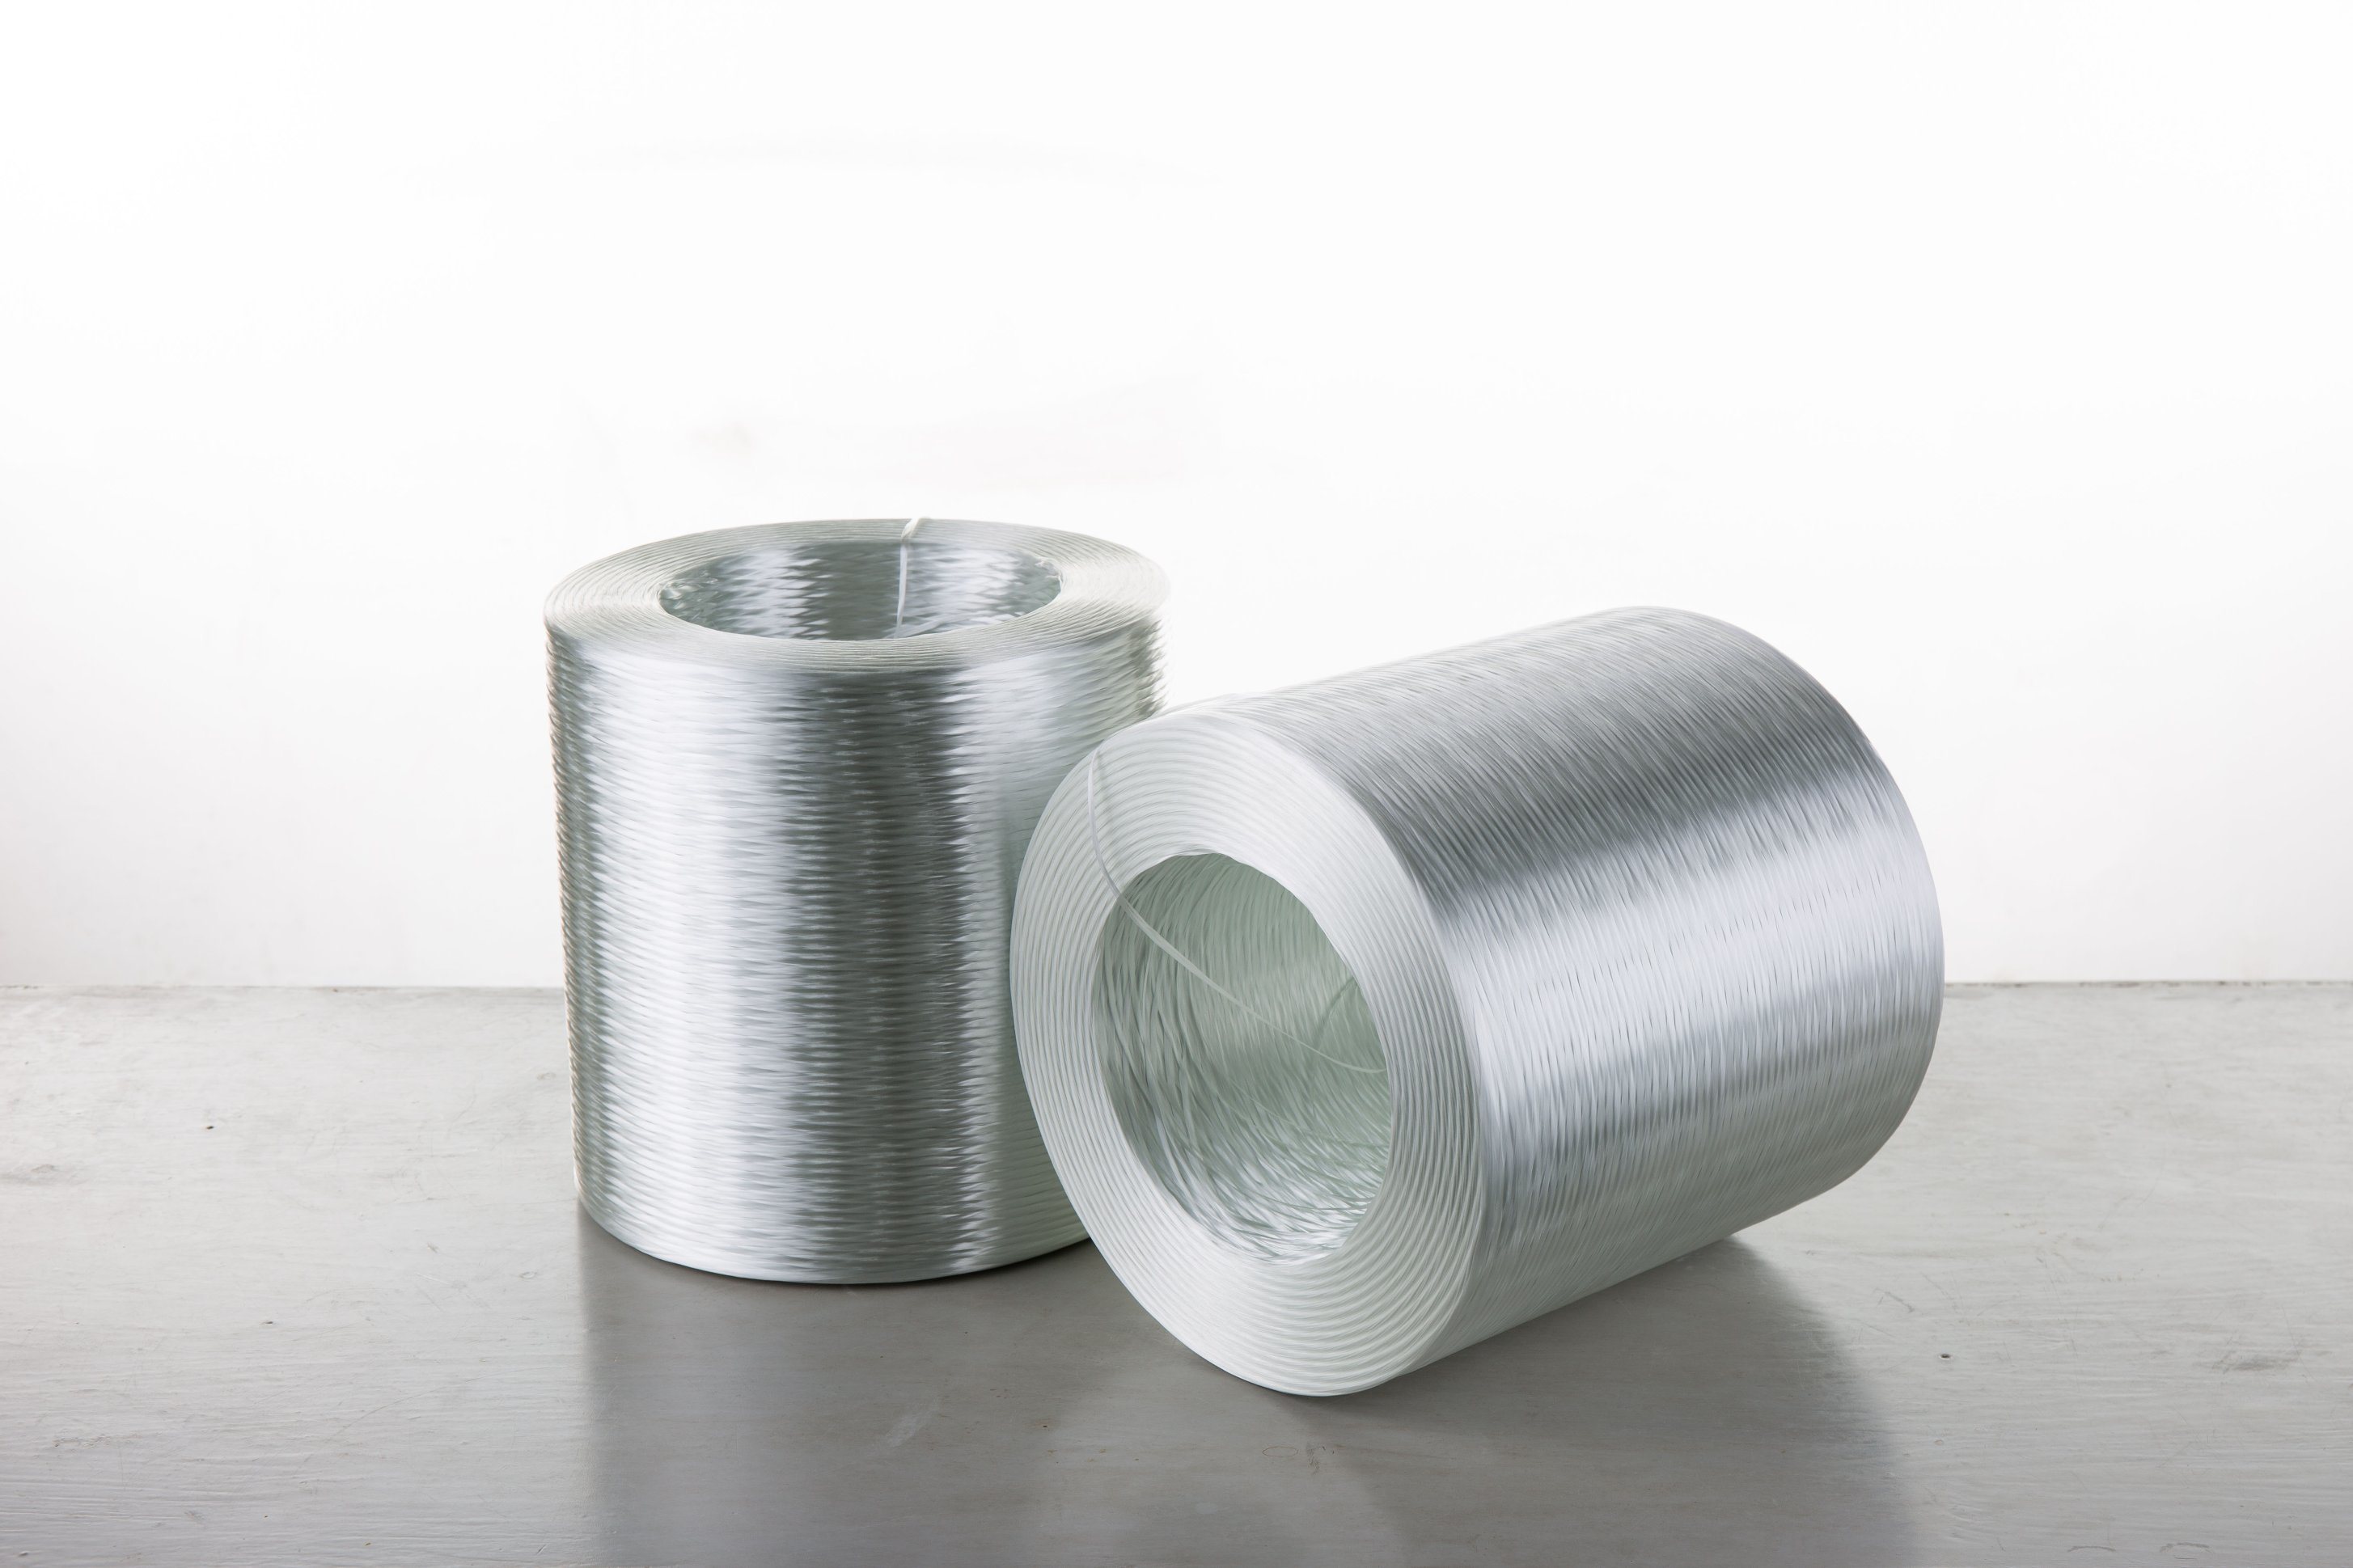 Global glass fiber materials market overview and trends